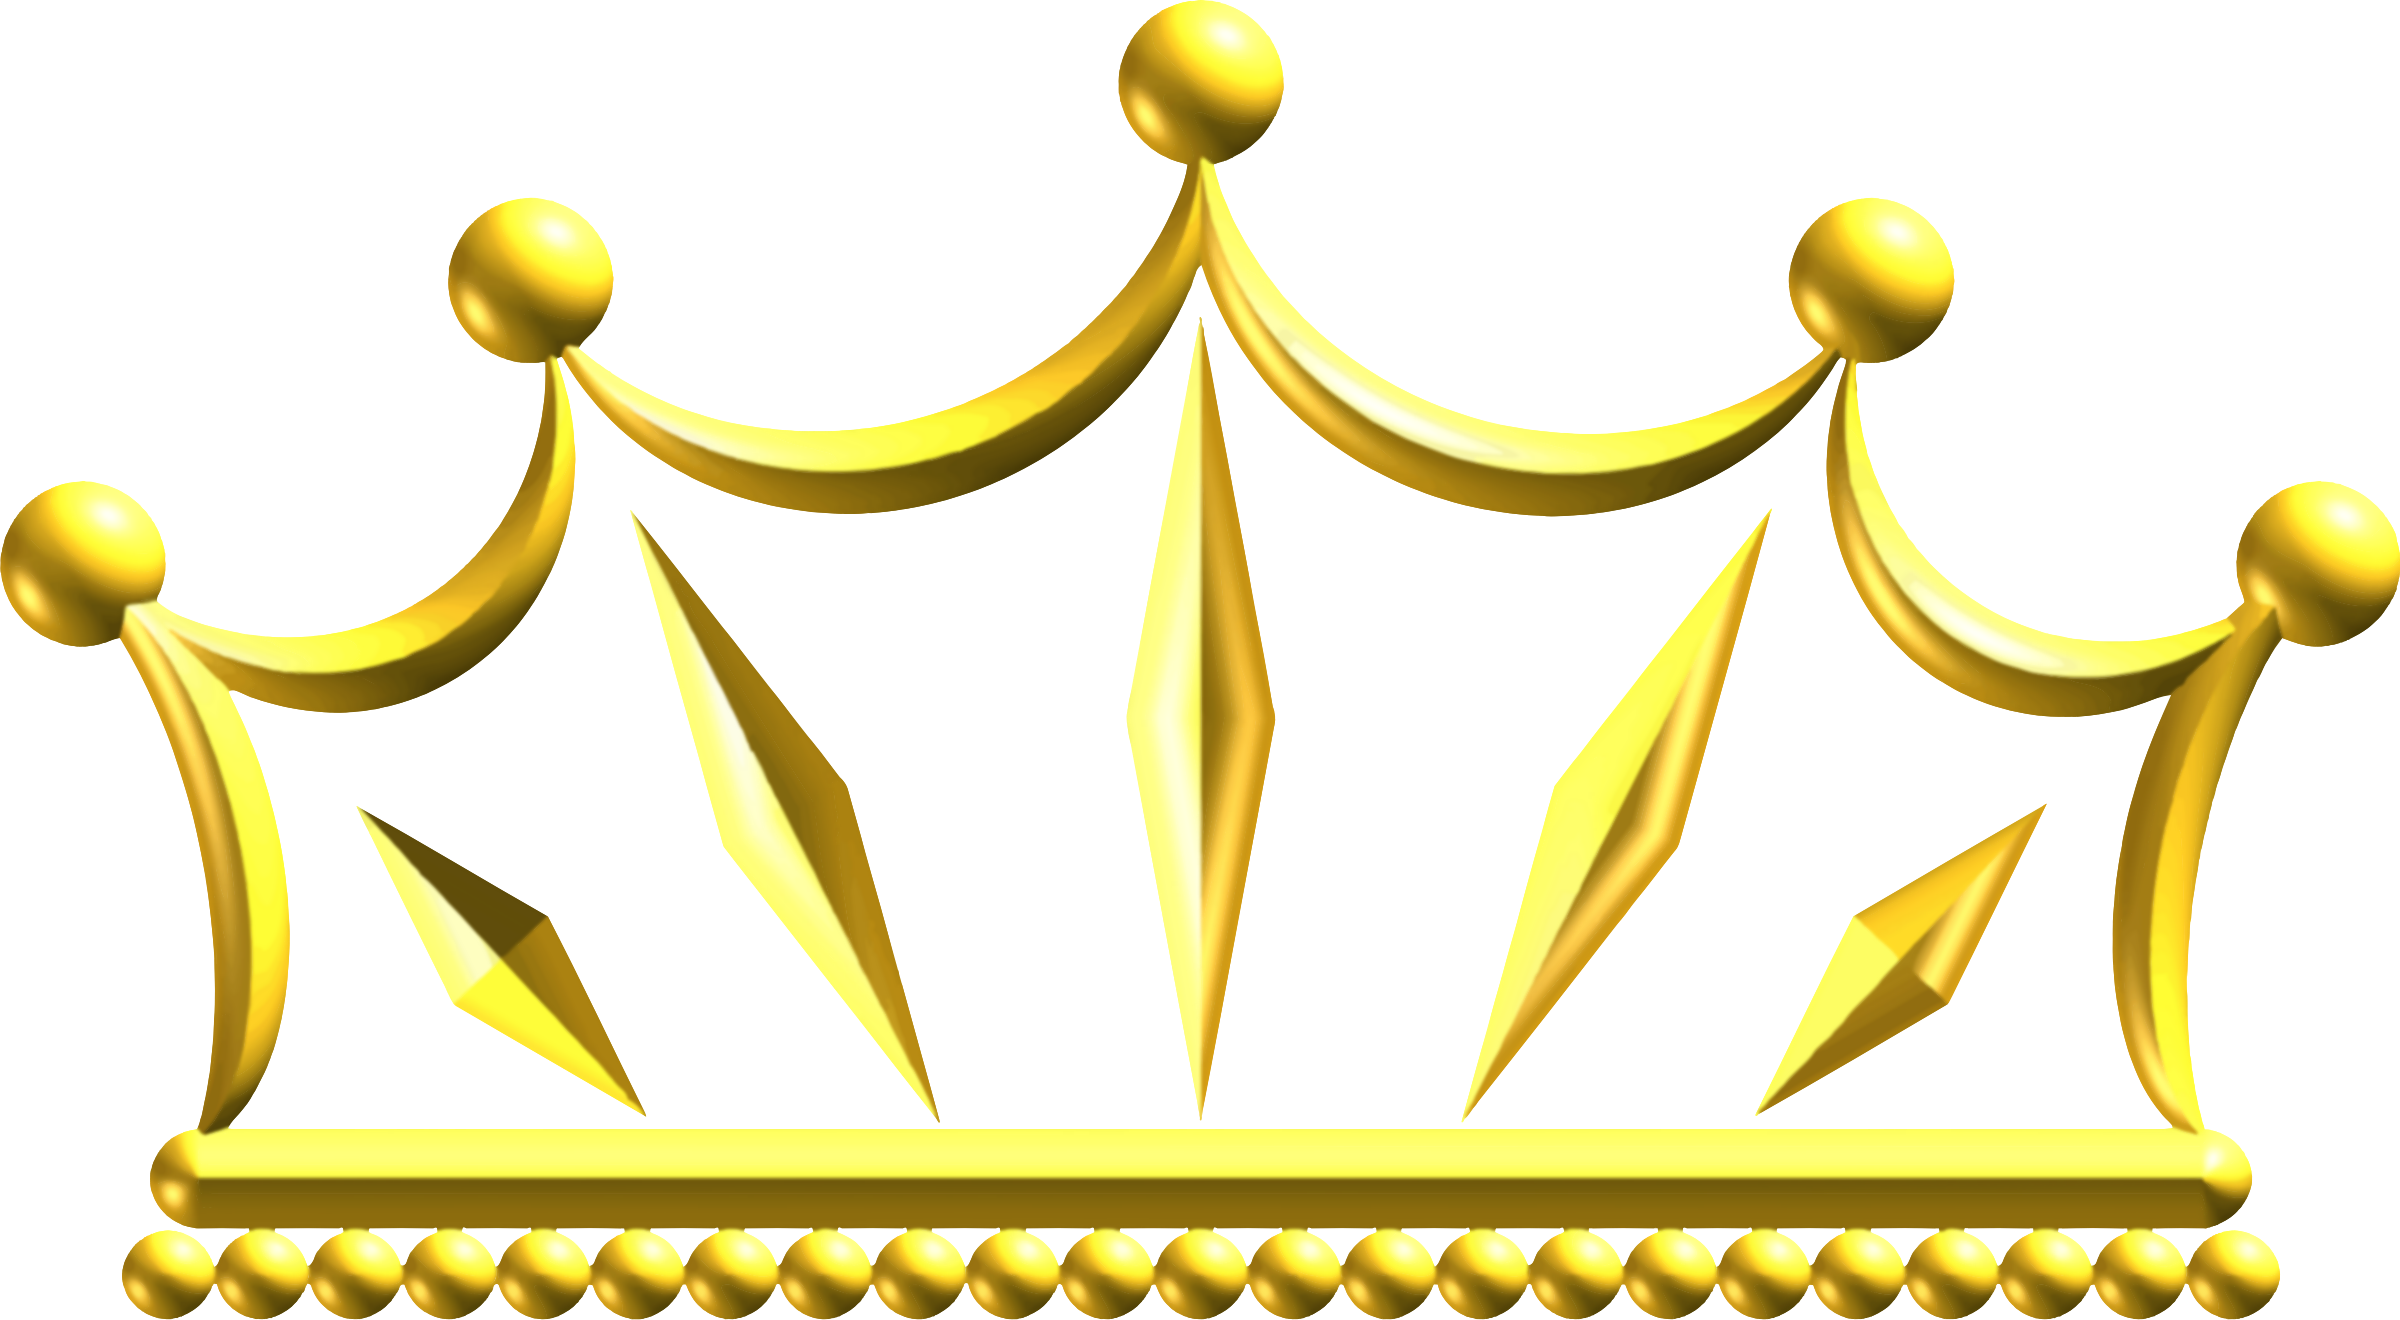 Clipart crown gold. Big image png